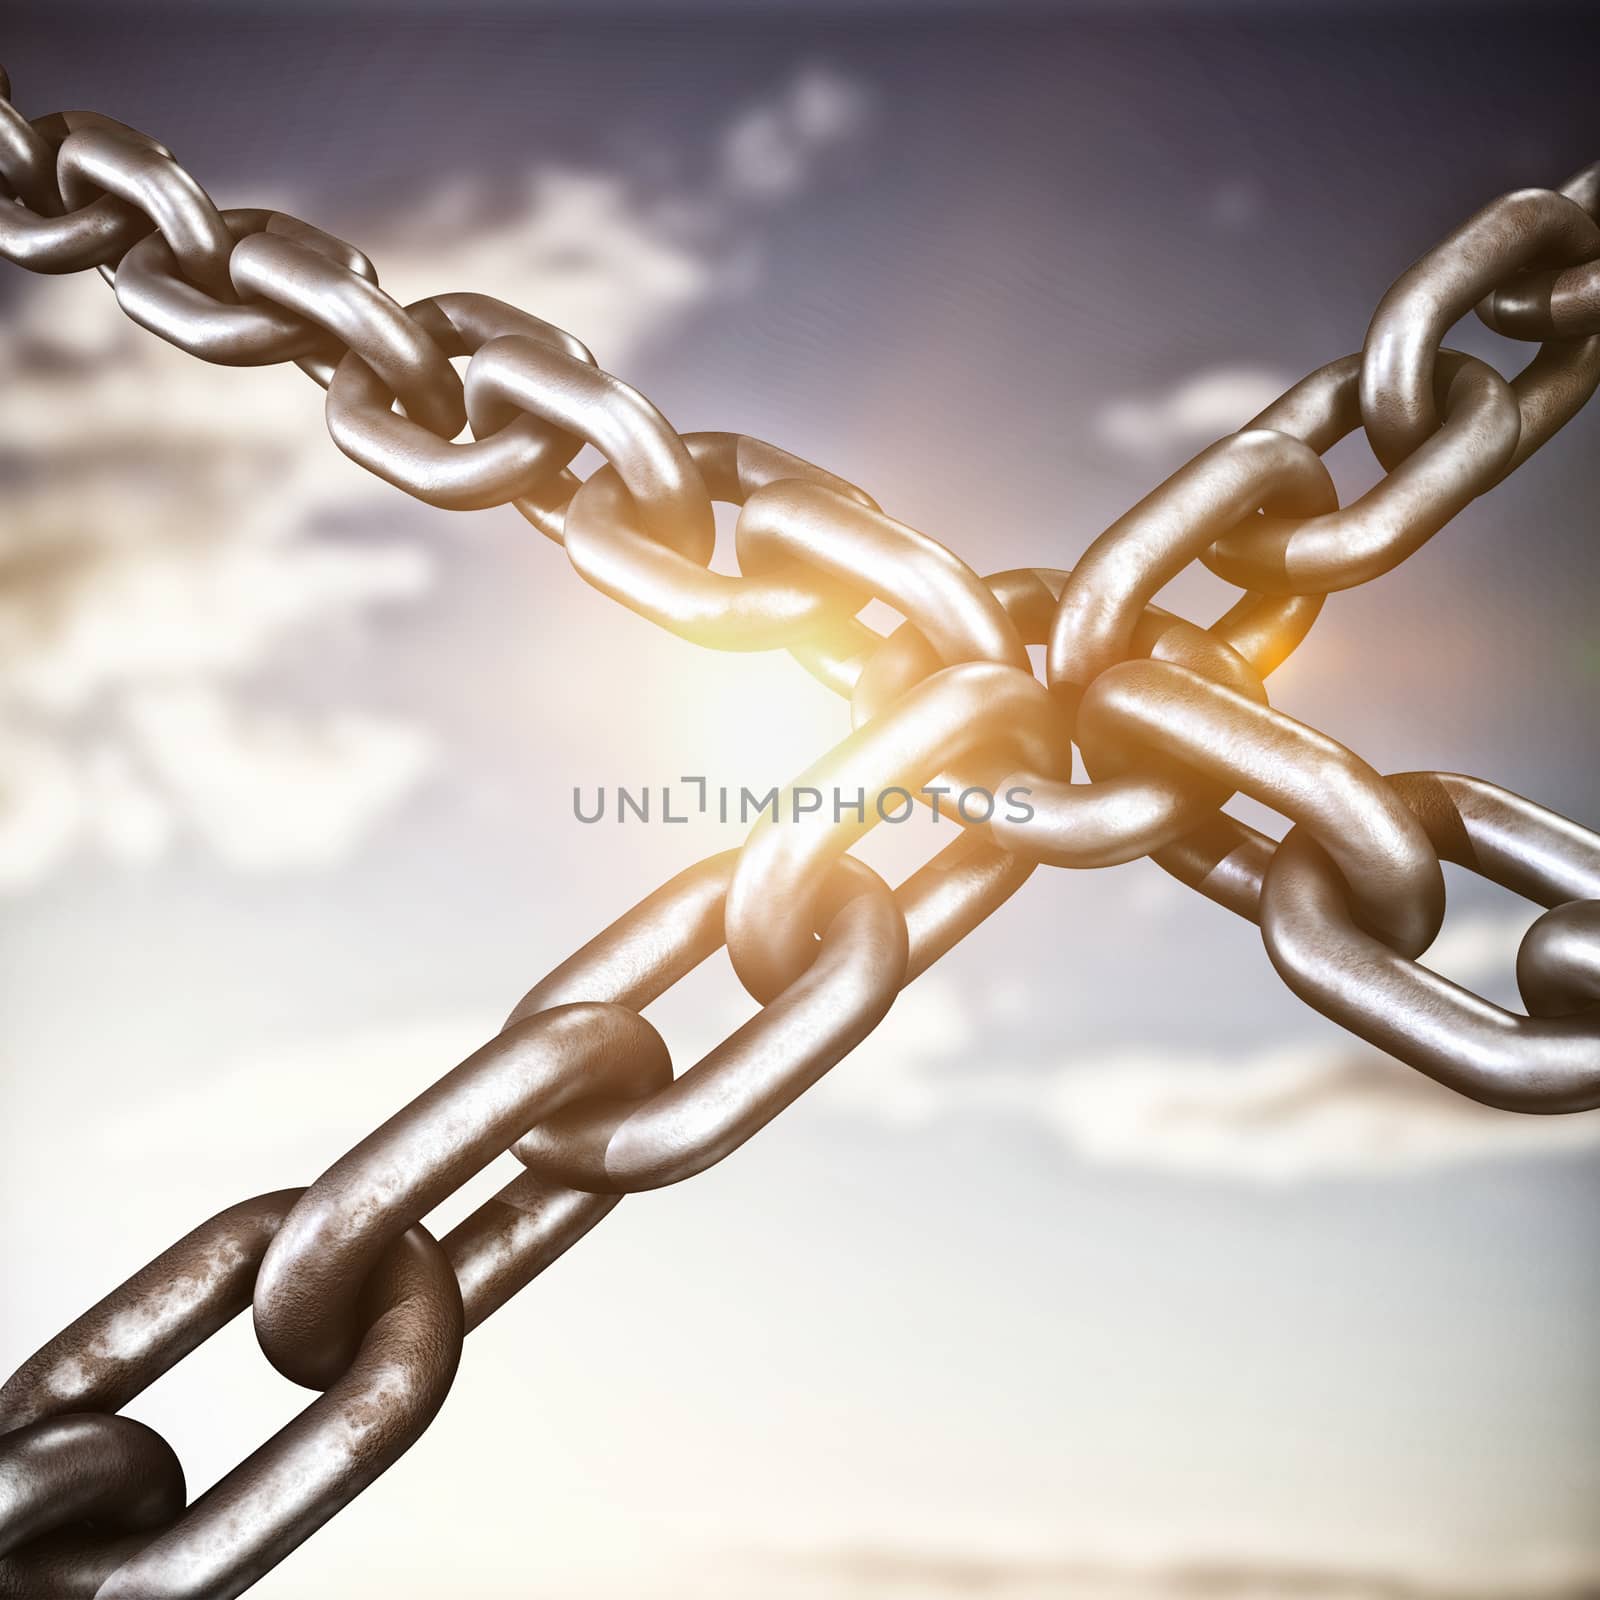 Closeup 3d image of metallic chains in cross shape against golden fields against cloudy sky